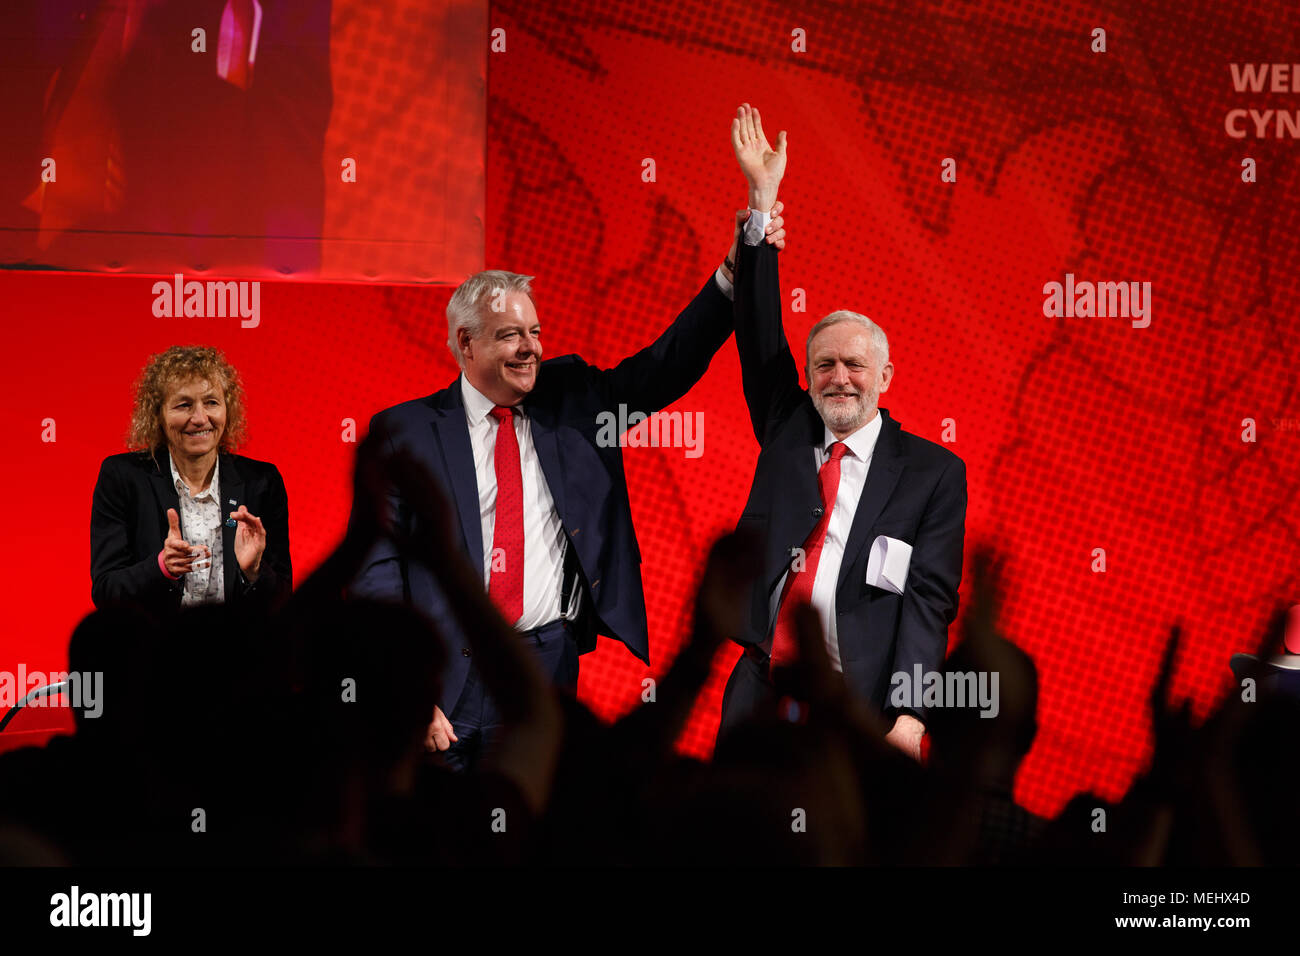 Welsh Labour Conference, Llandudno, UK, 22 April 2018. Carwyn Jones and Jeremy Corbyn on stage Welsh Labour Conference Credit: Sean Pursey/Alamy Live News Stock Photo